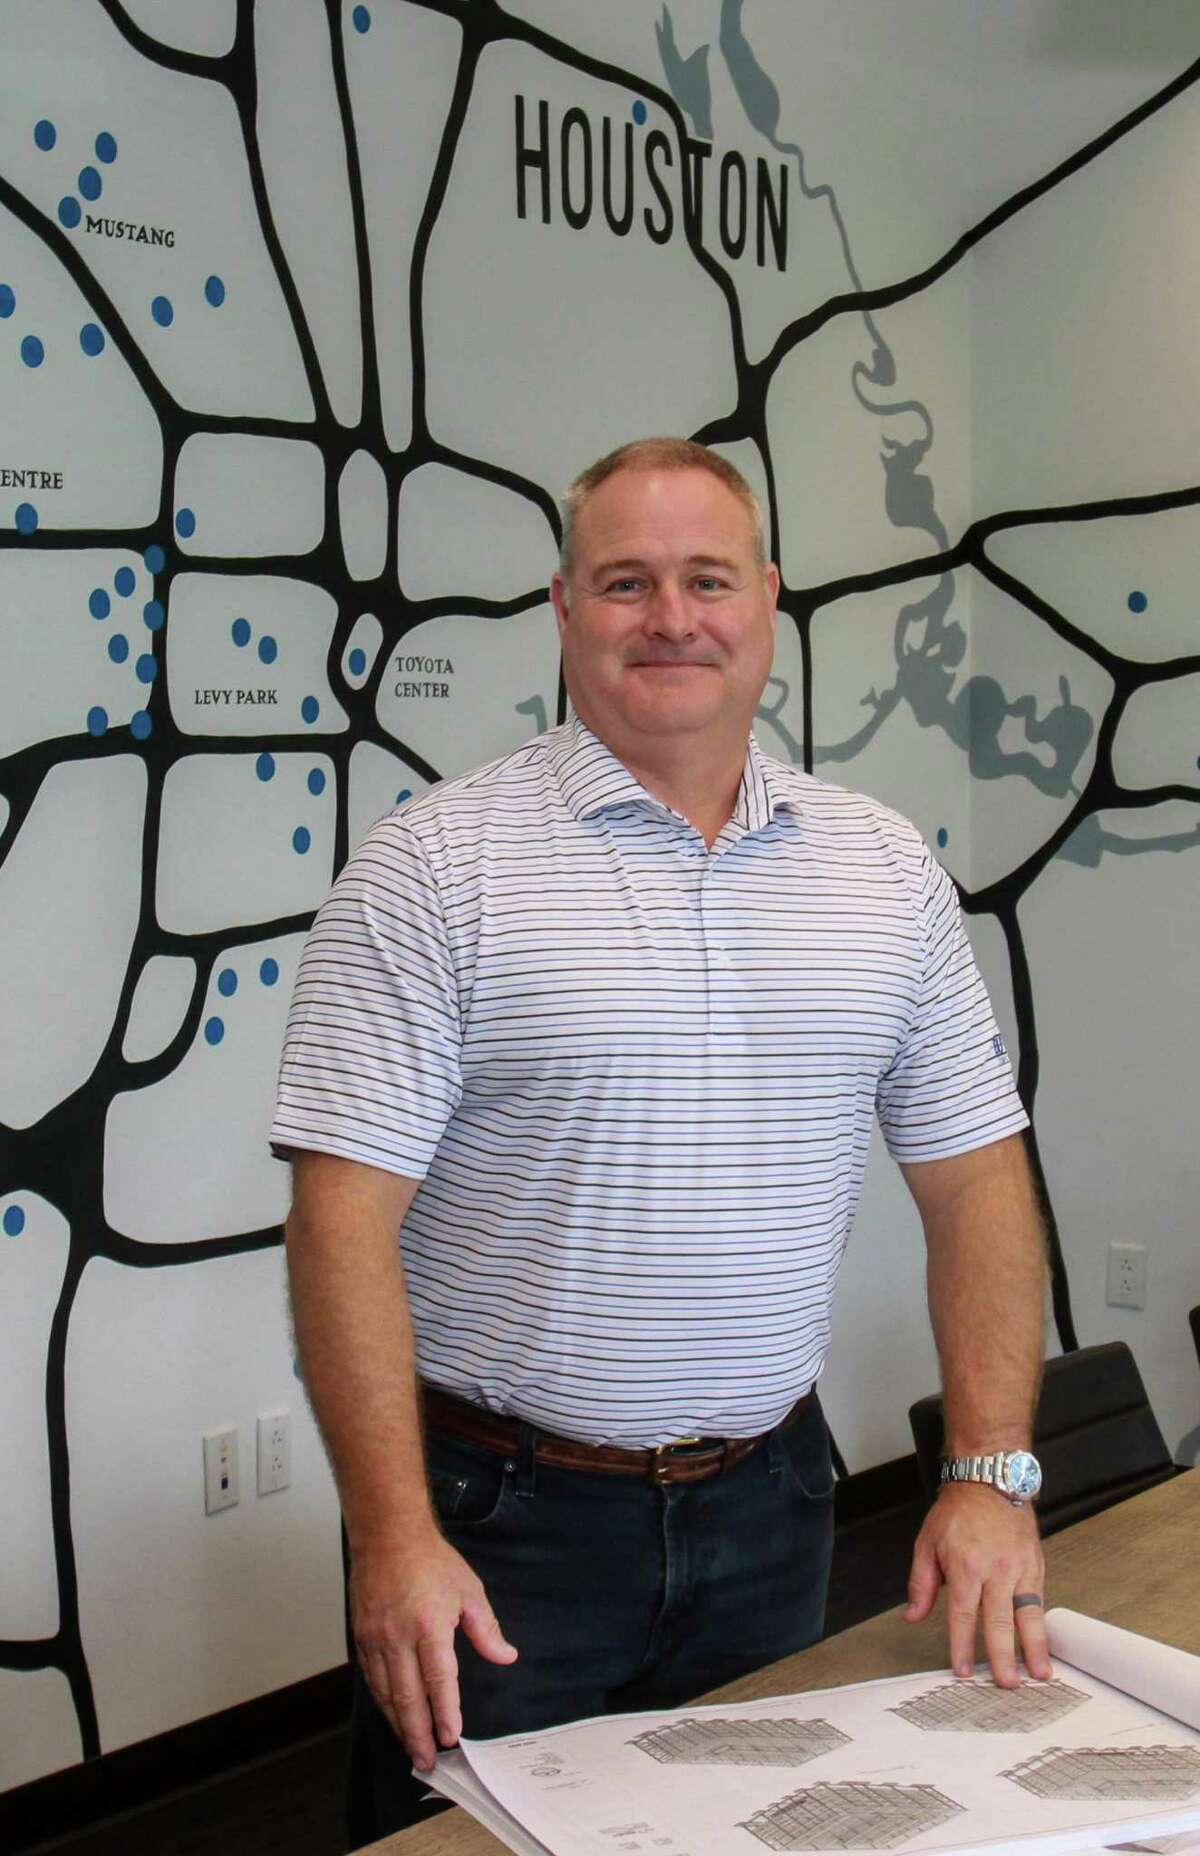 Shawn McAlpin, CEO of Burton Construction in a conference room with a map showing the location of some of their projects in their office in Houston on September 30, 2019.